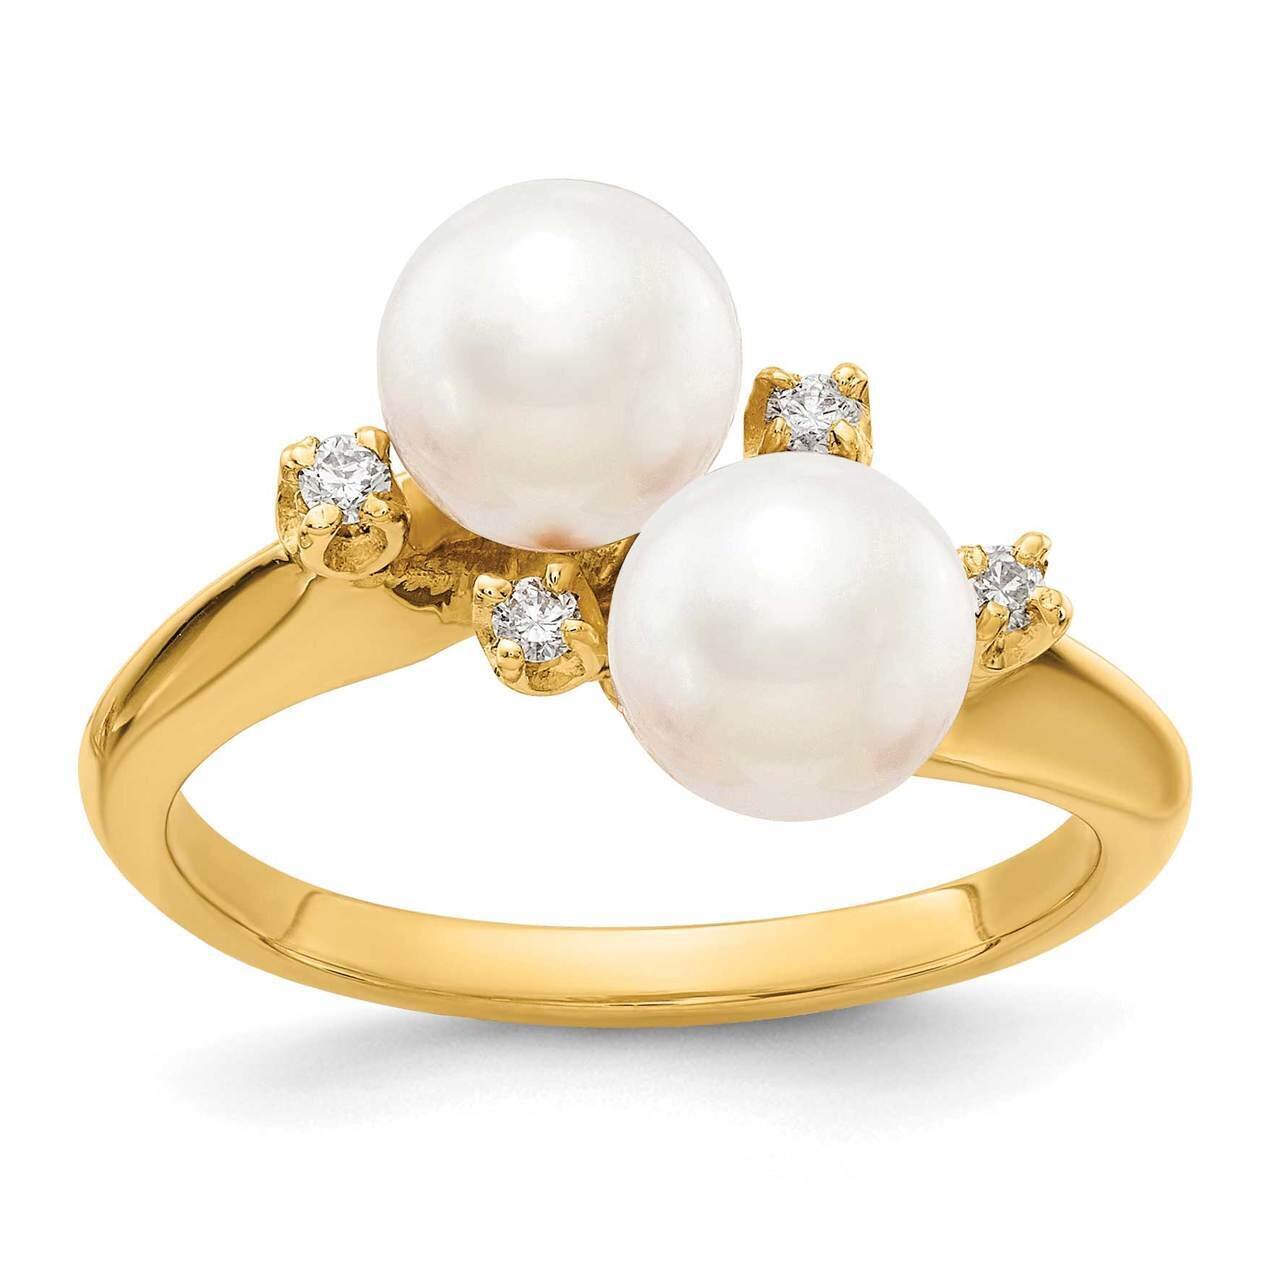 6mm Freshwater Cultured Pearl Diamond Ring 14k Gold Y1875PL_AA